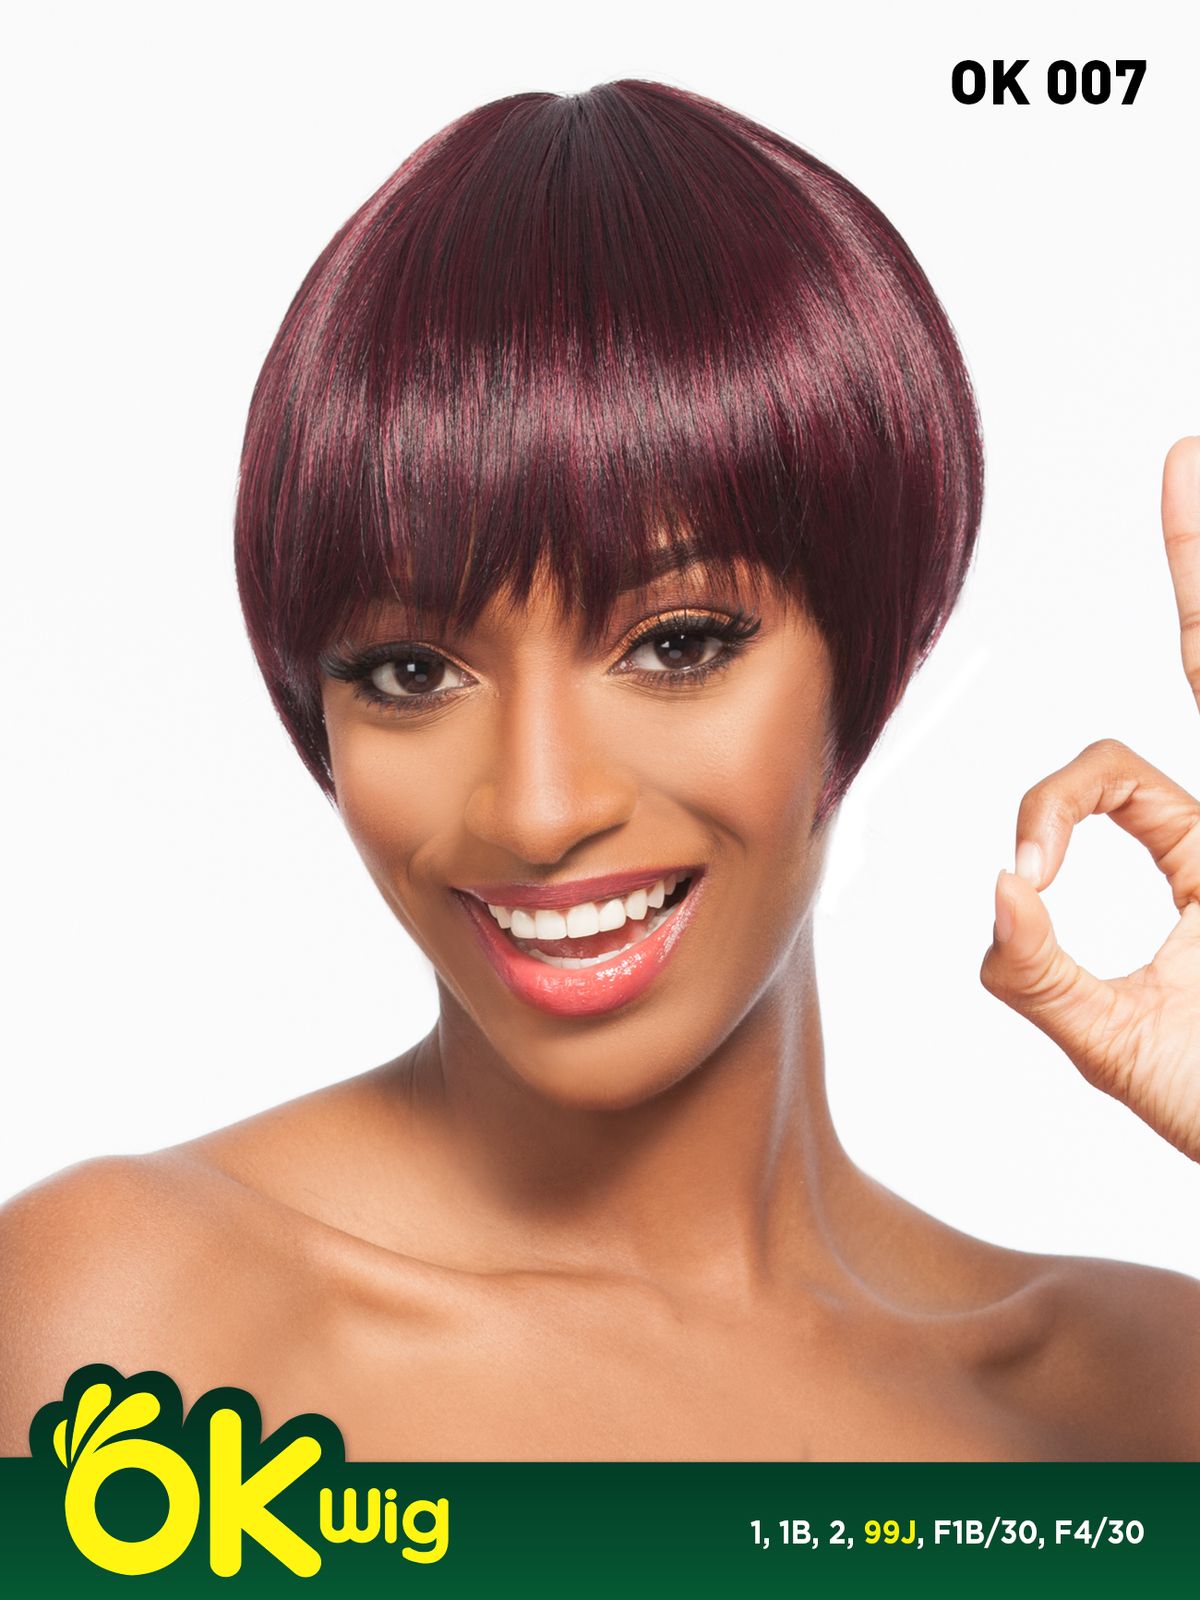 Hair Topic Soft & Natural Synthetic Wig OK 007